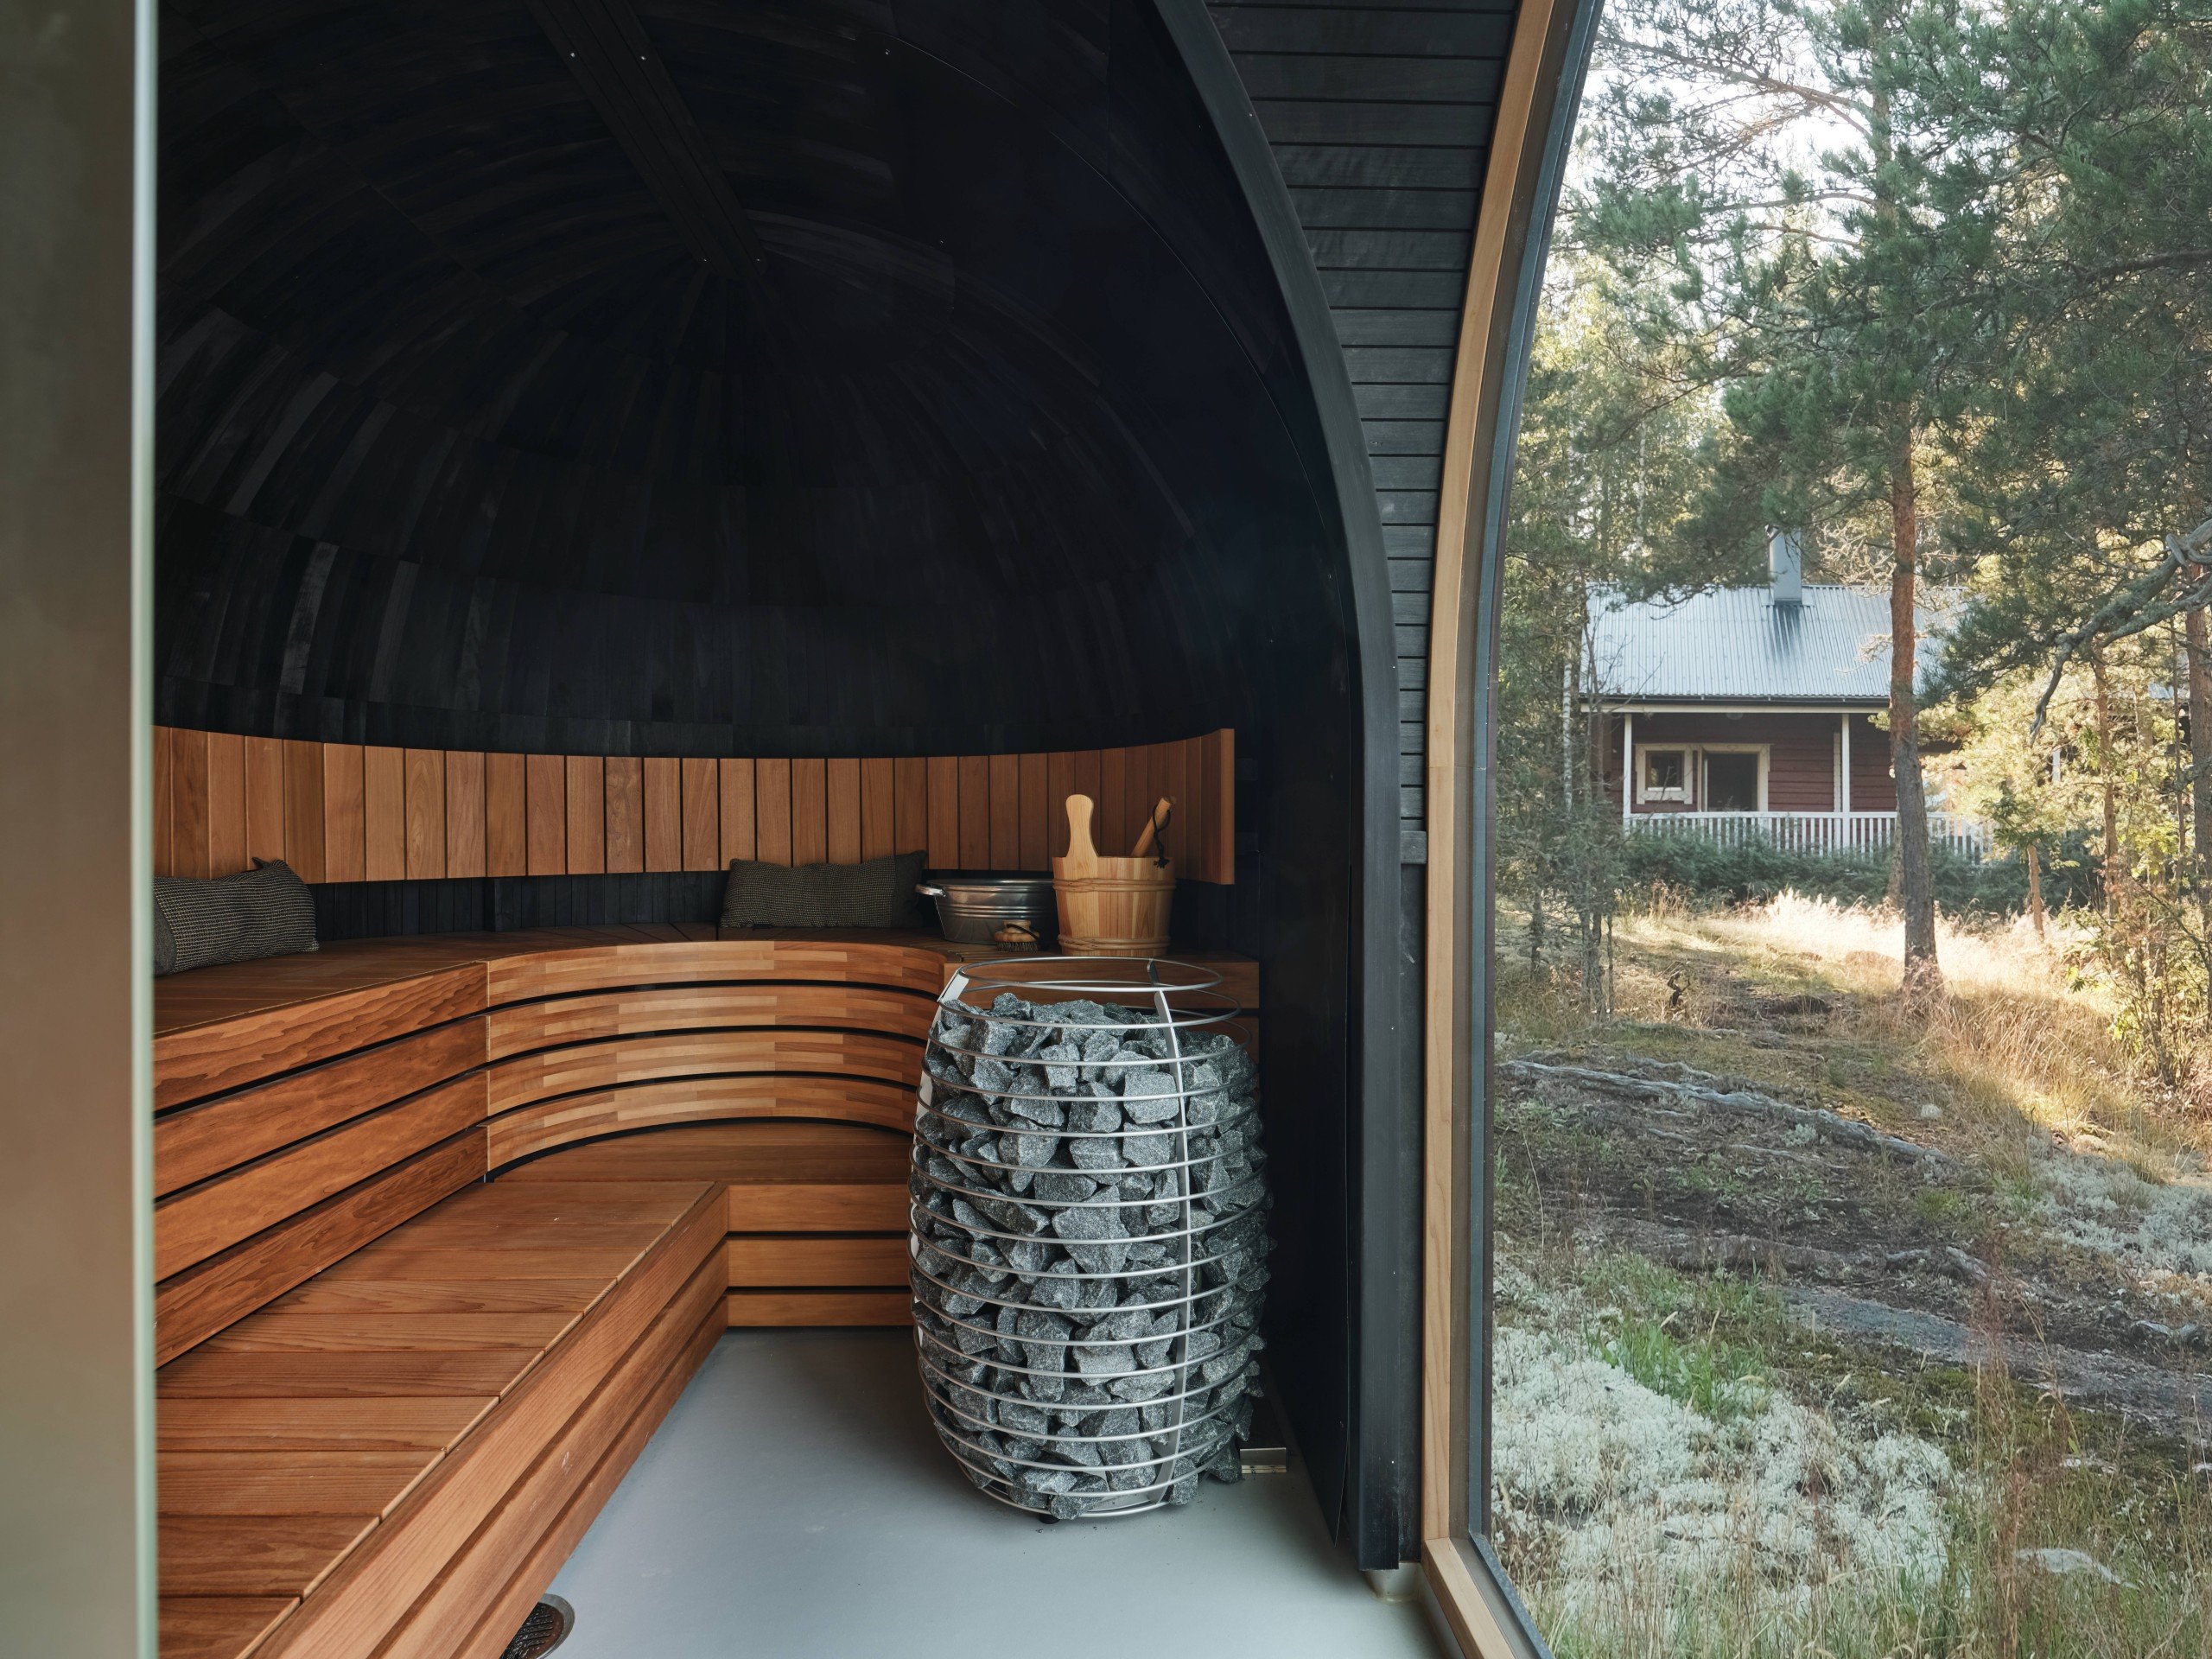 Sauna room with an electric heater and a window